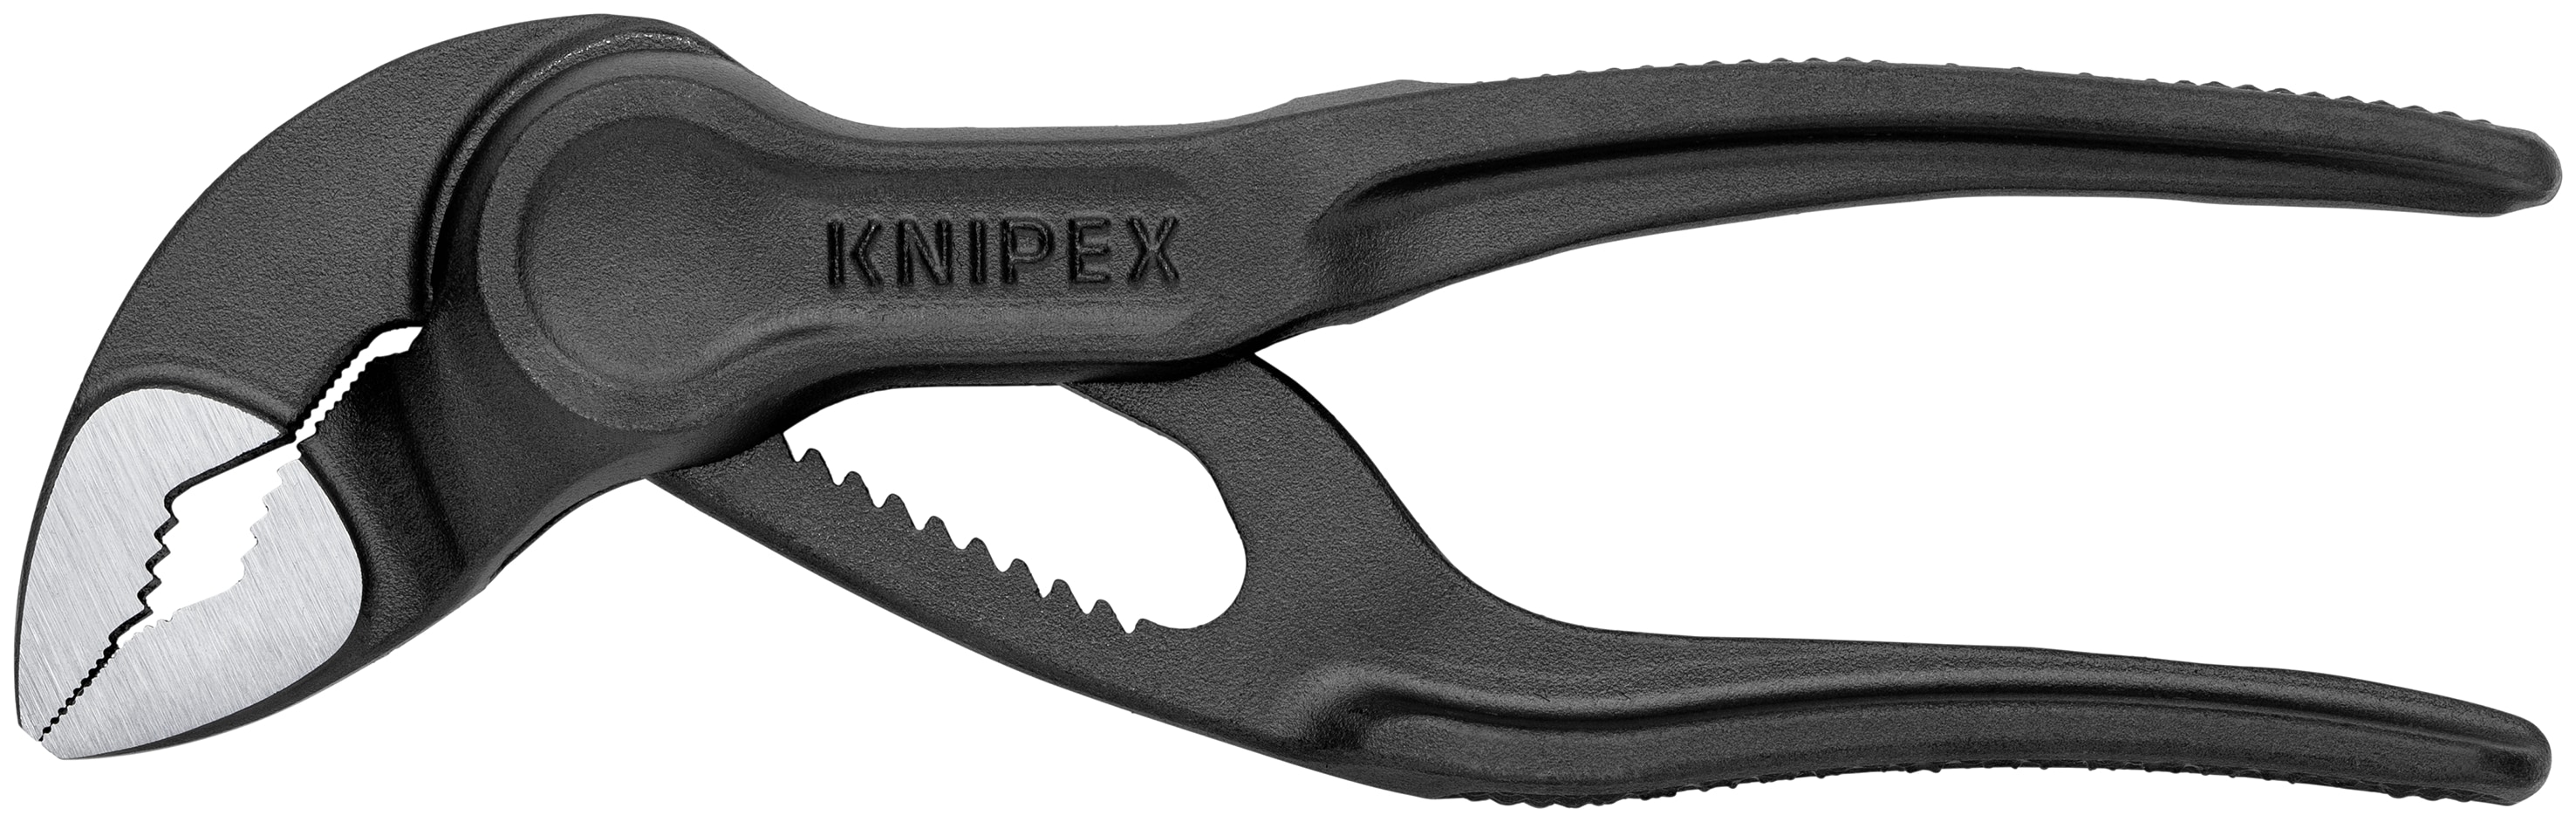 Knipex Cobra 4pc Adjustable Plier Set Water Pump Pliers 5 7 10 12 w  Holder - Bowers Tool Co.